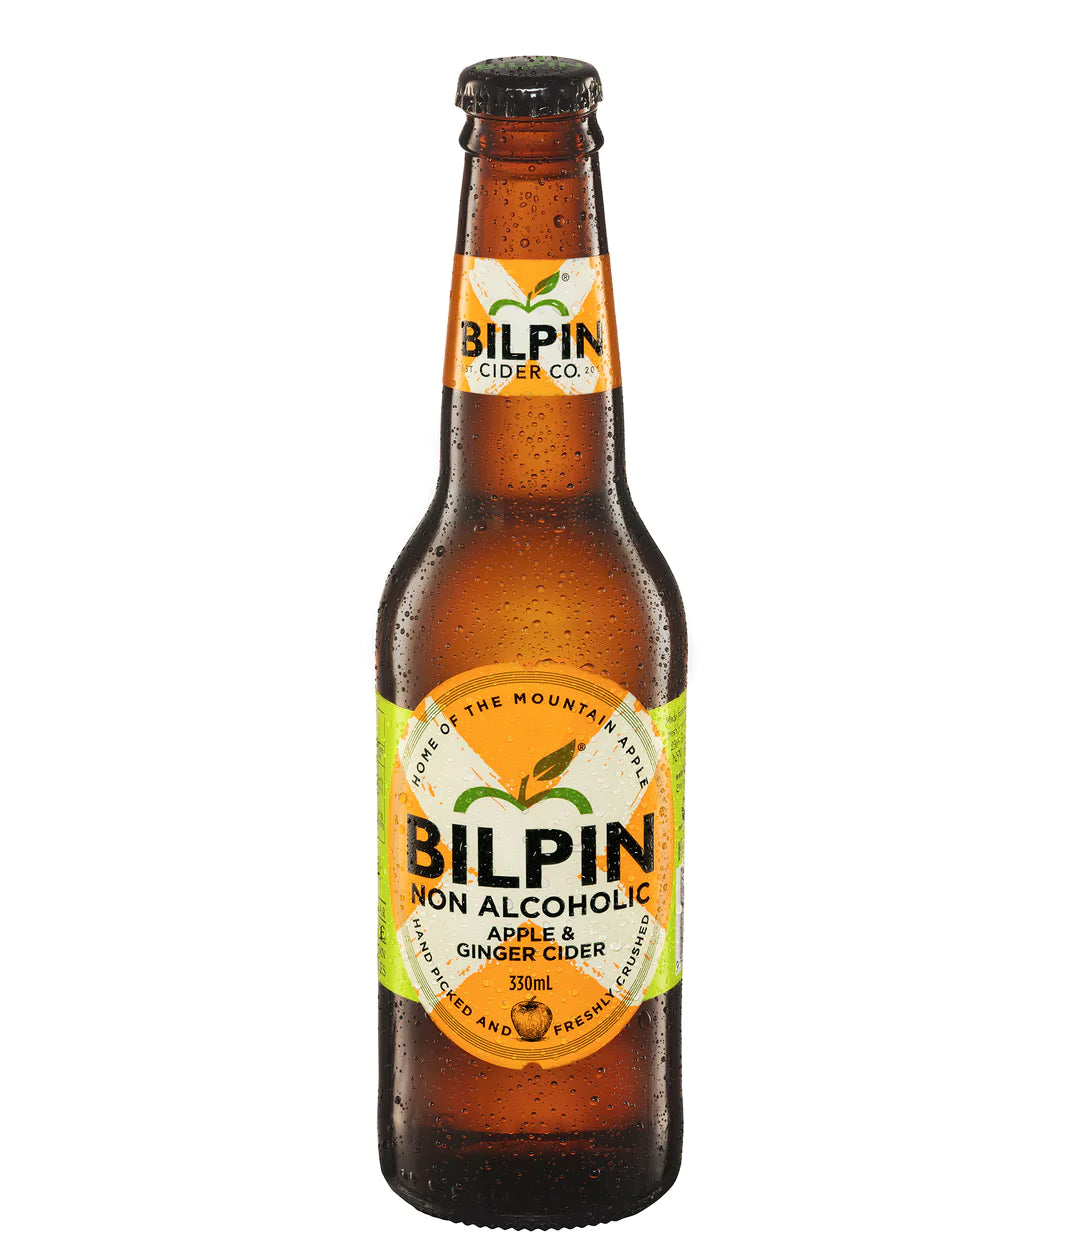 Bilpin Non-Alcoholic Apple and Ginger Cider 330mL